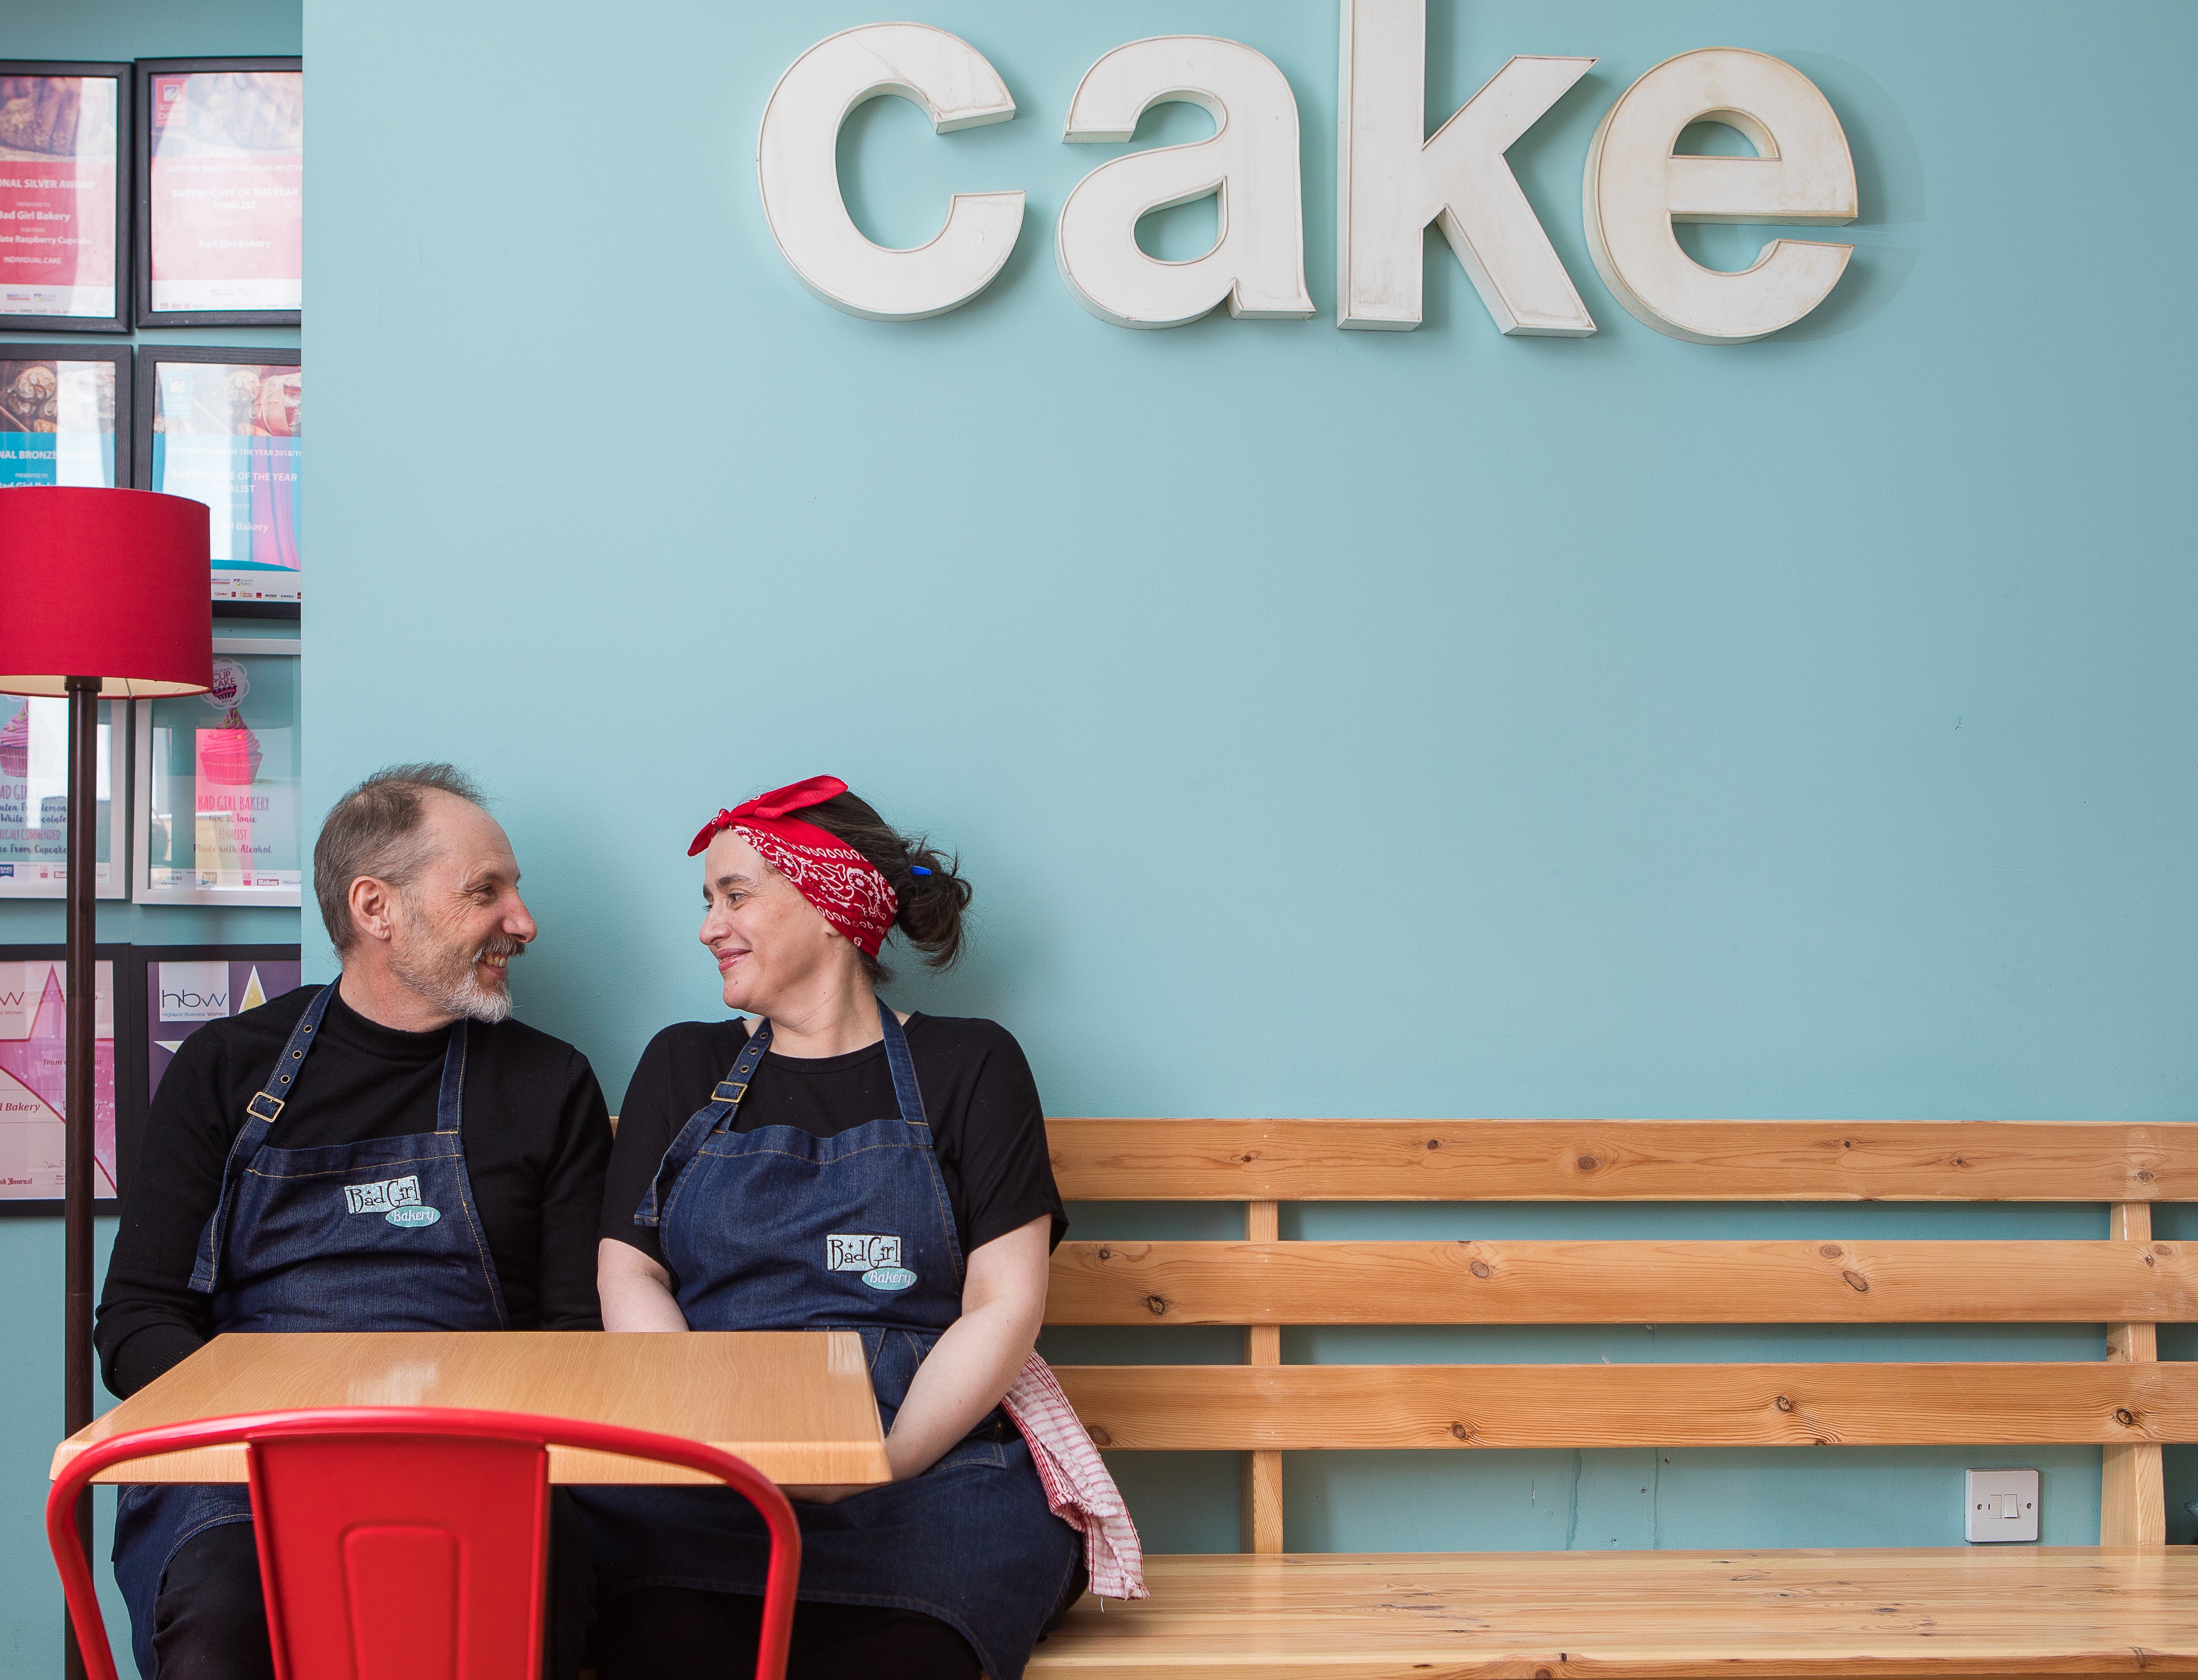 Bad Girl Bakery is run by Jeni and her husband Douglas on an island in the Scottish Highlands